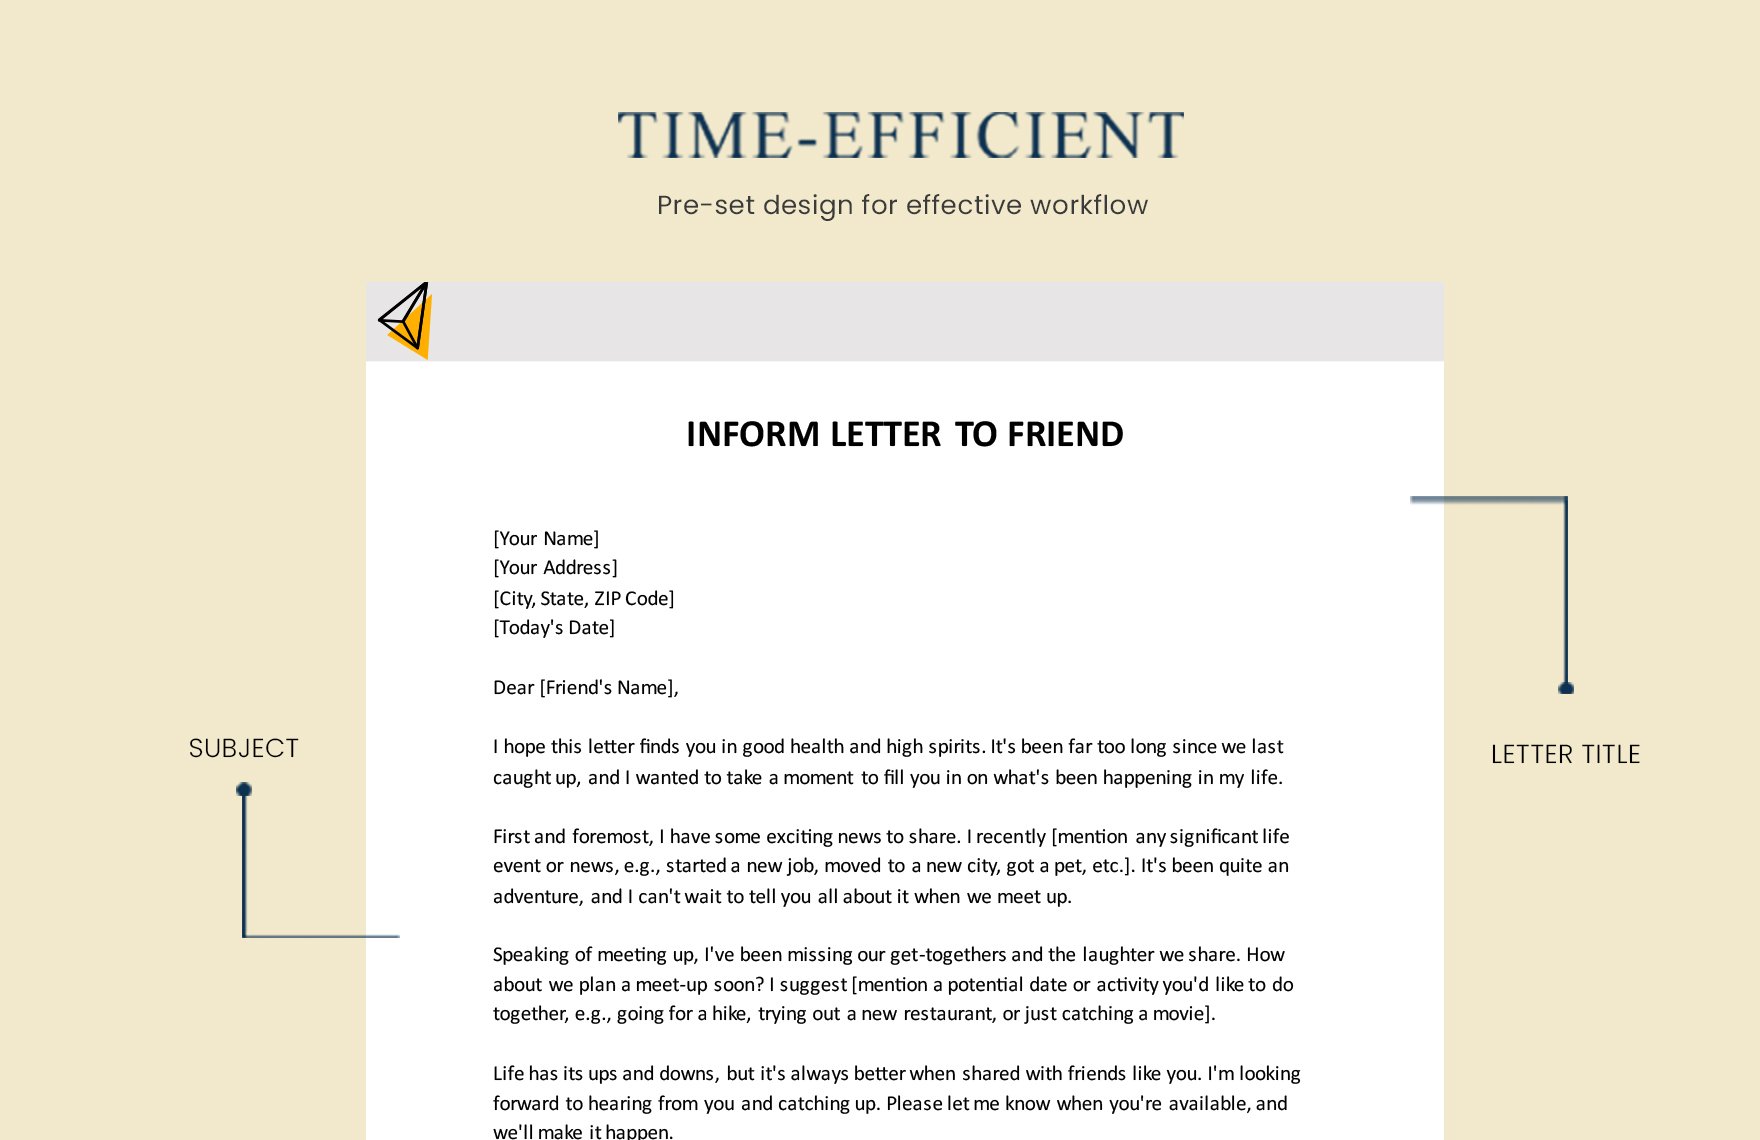 Inform Letter To Friend